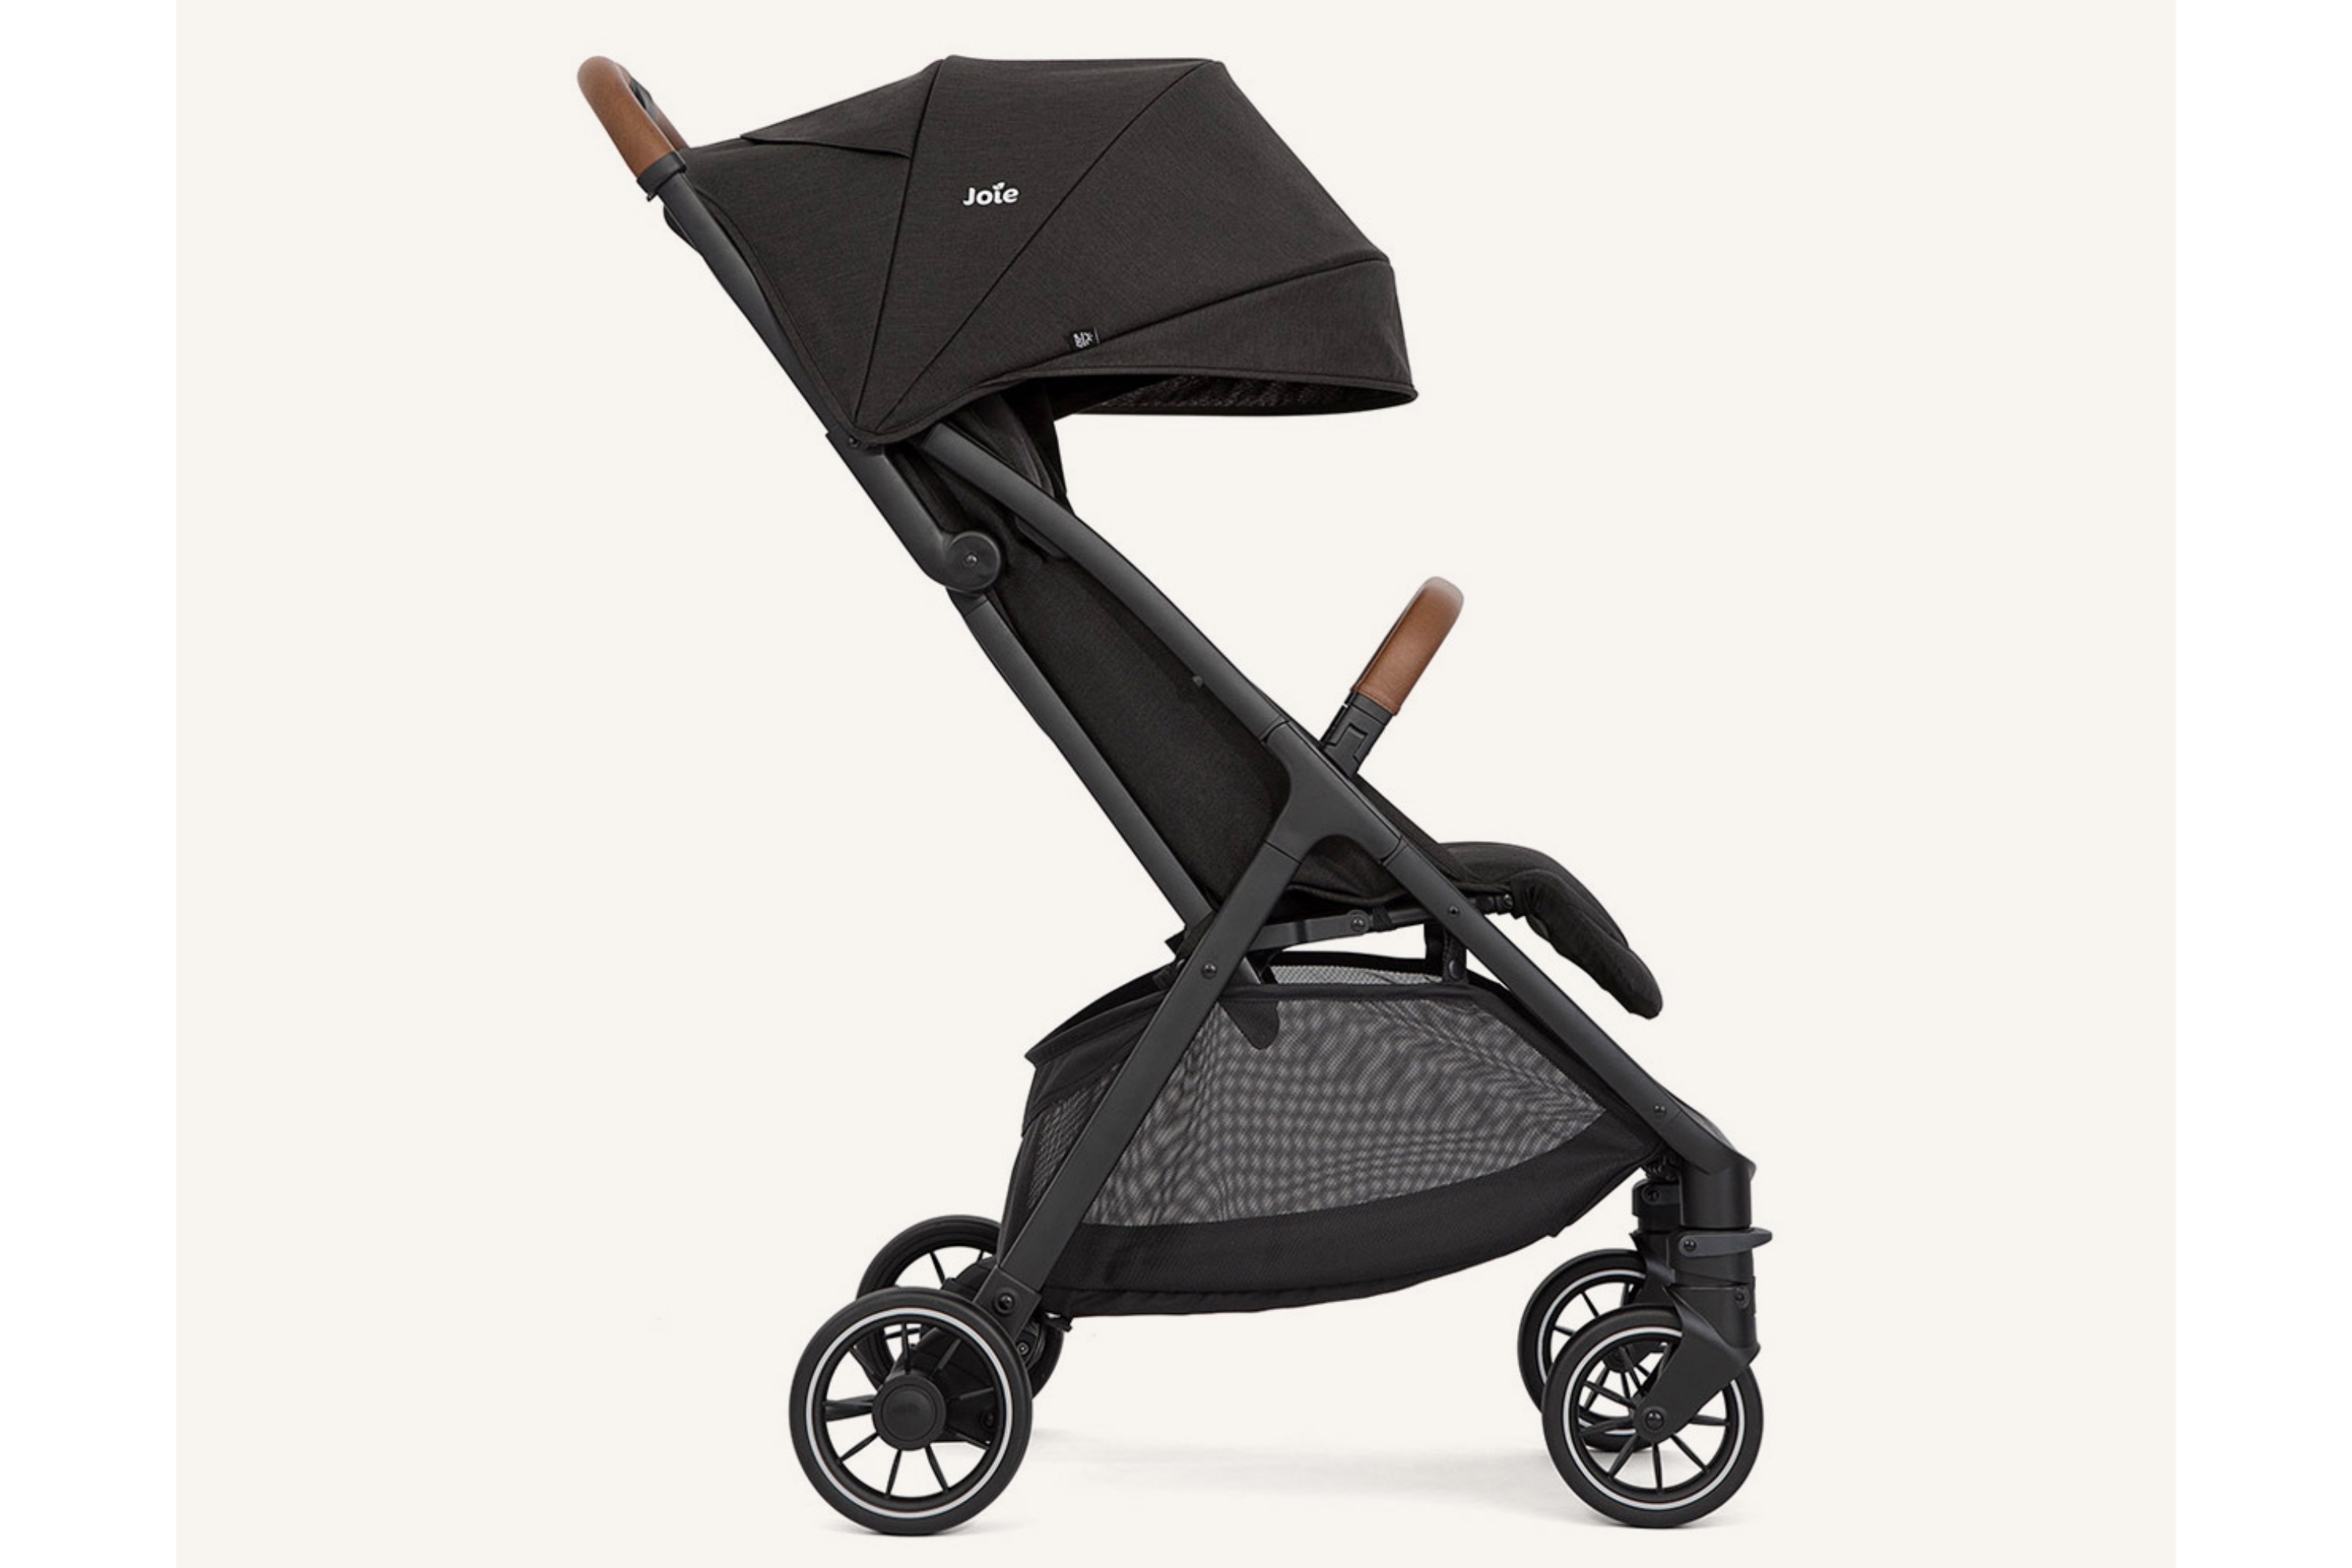 The Joie Pact Pro lightiweight compact stroller